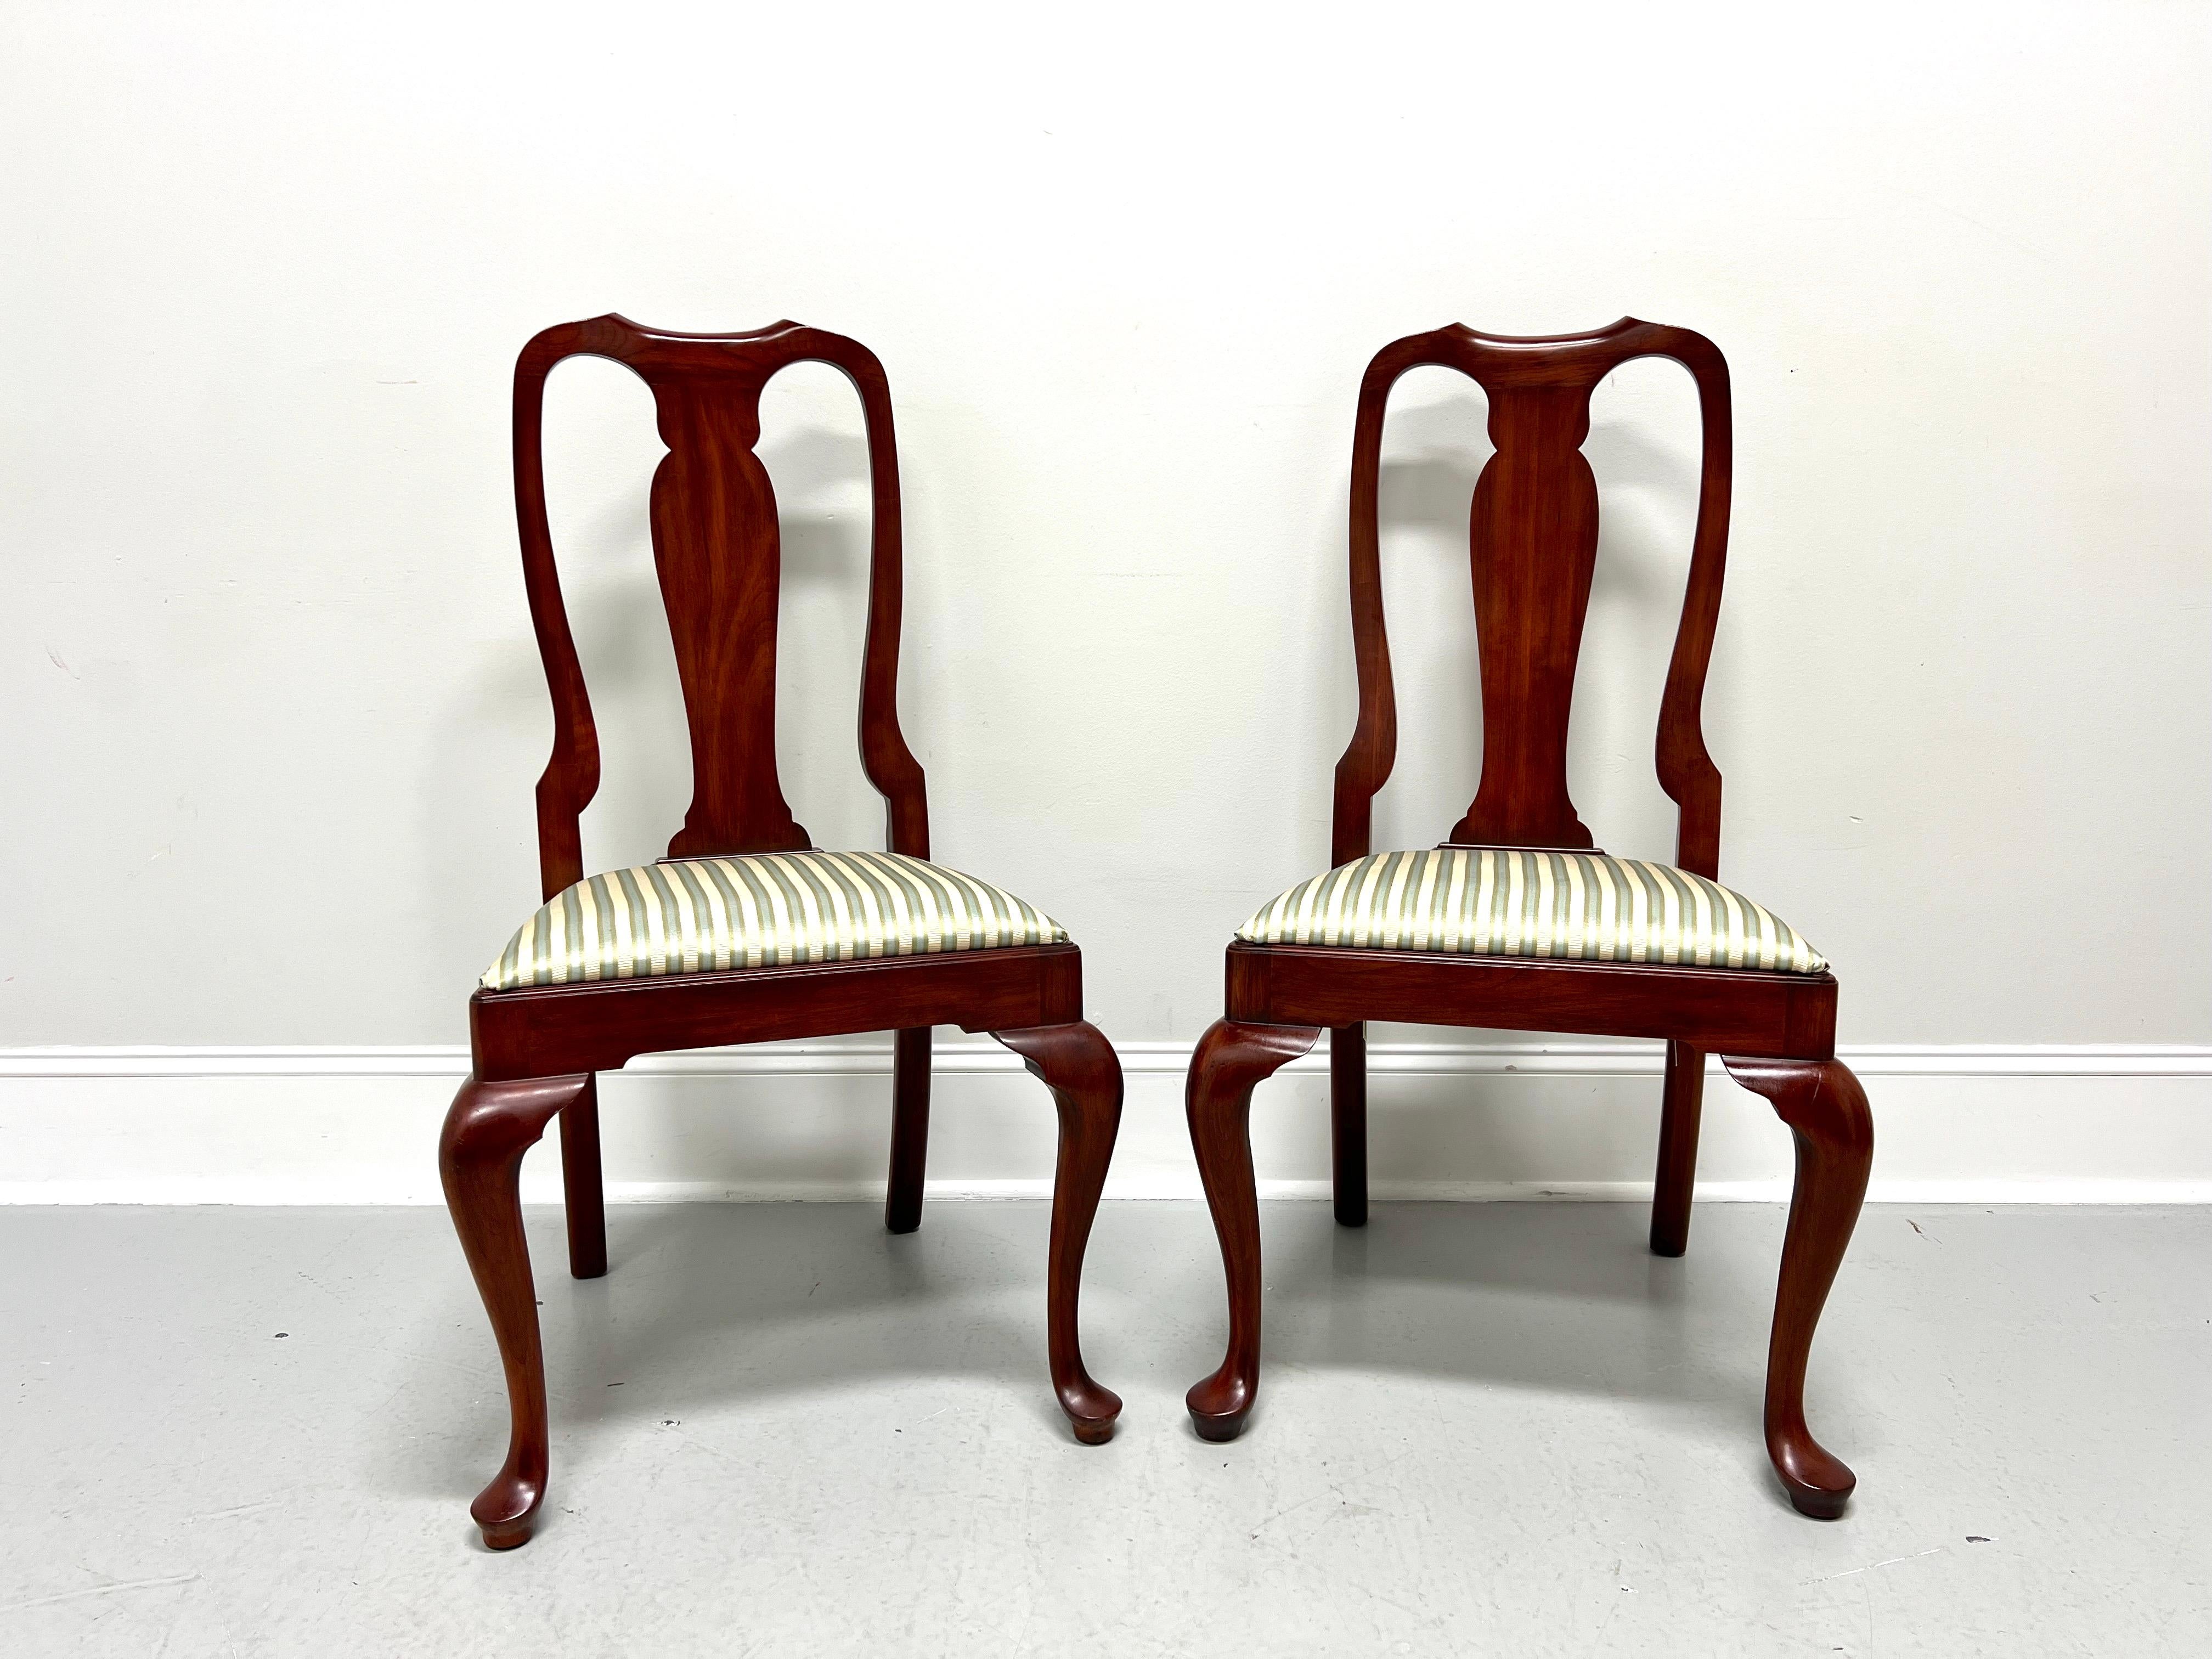 HENKEL HARRIS 105S 24 Wild Black Cherry Queen Anne Dining Side Chairs - Pair A For Sale 5